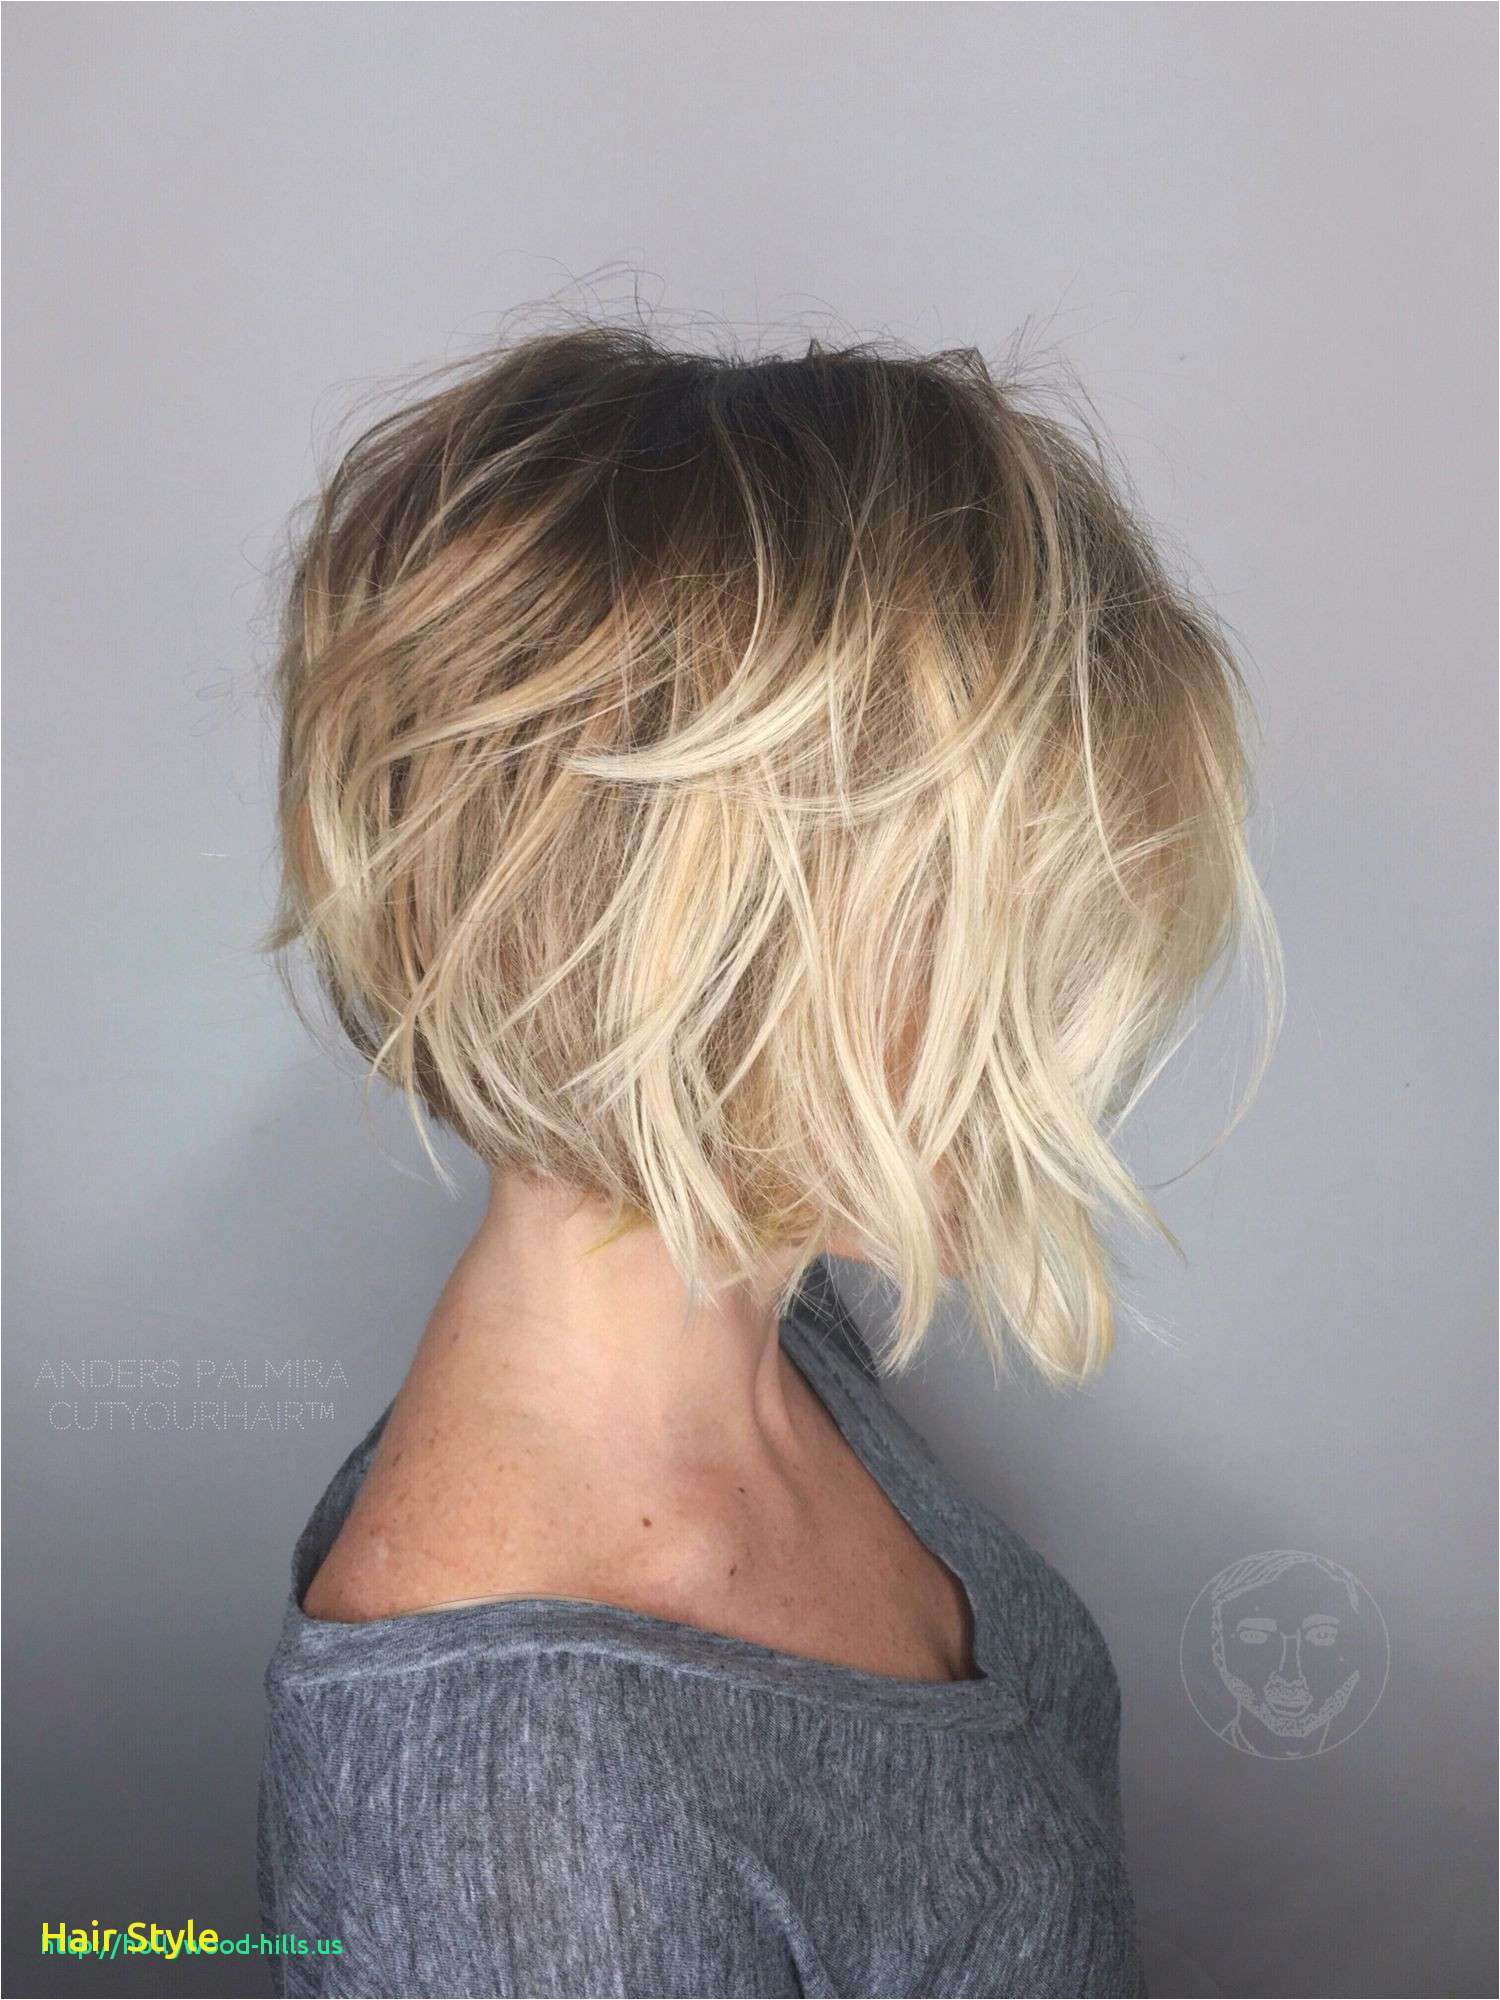 highlights hair trend with extra enchanting medium bob hairstyle awesome i pinimg 1200x 0d 60 8a